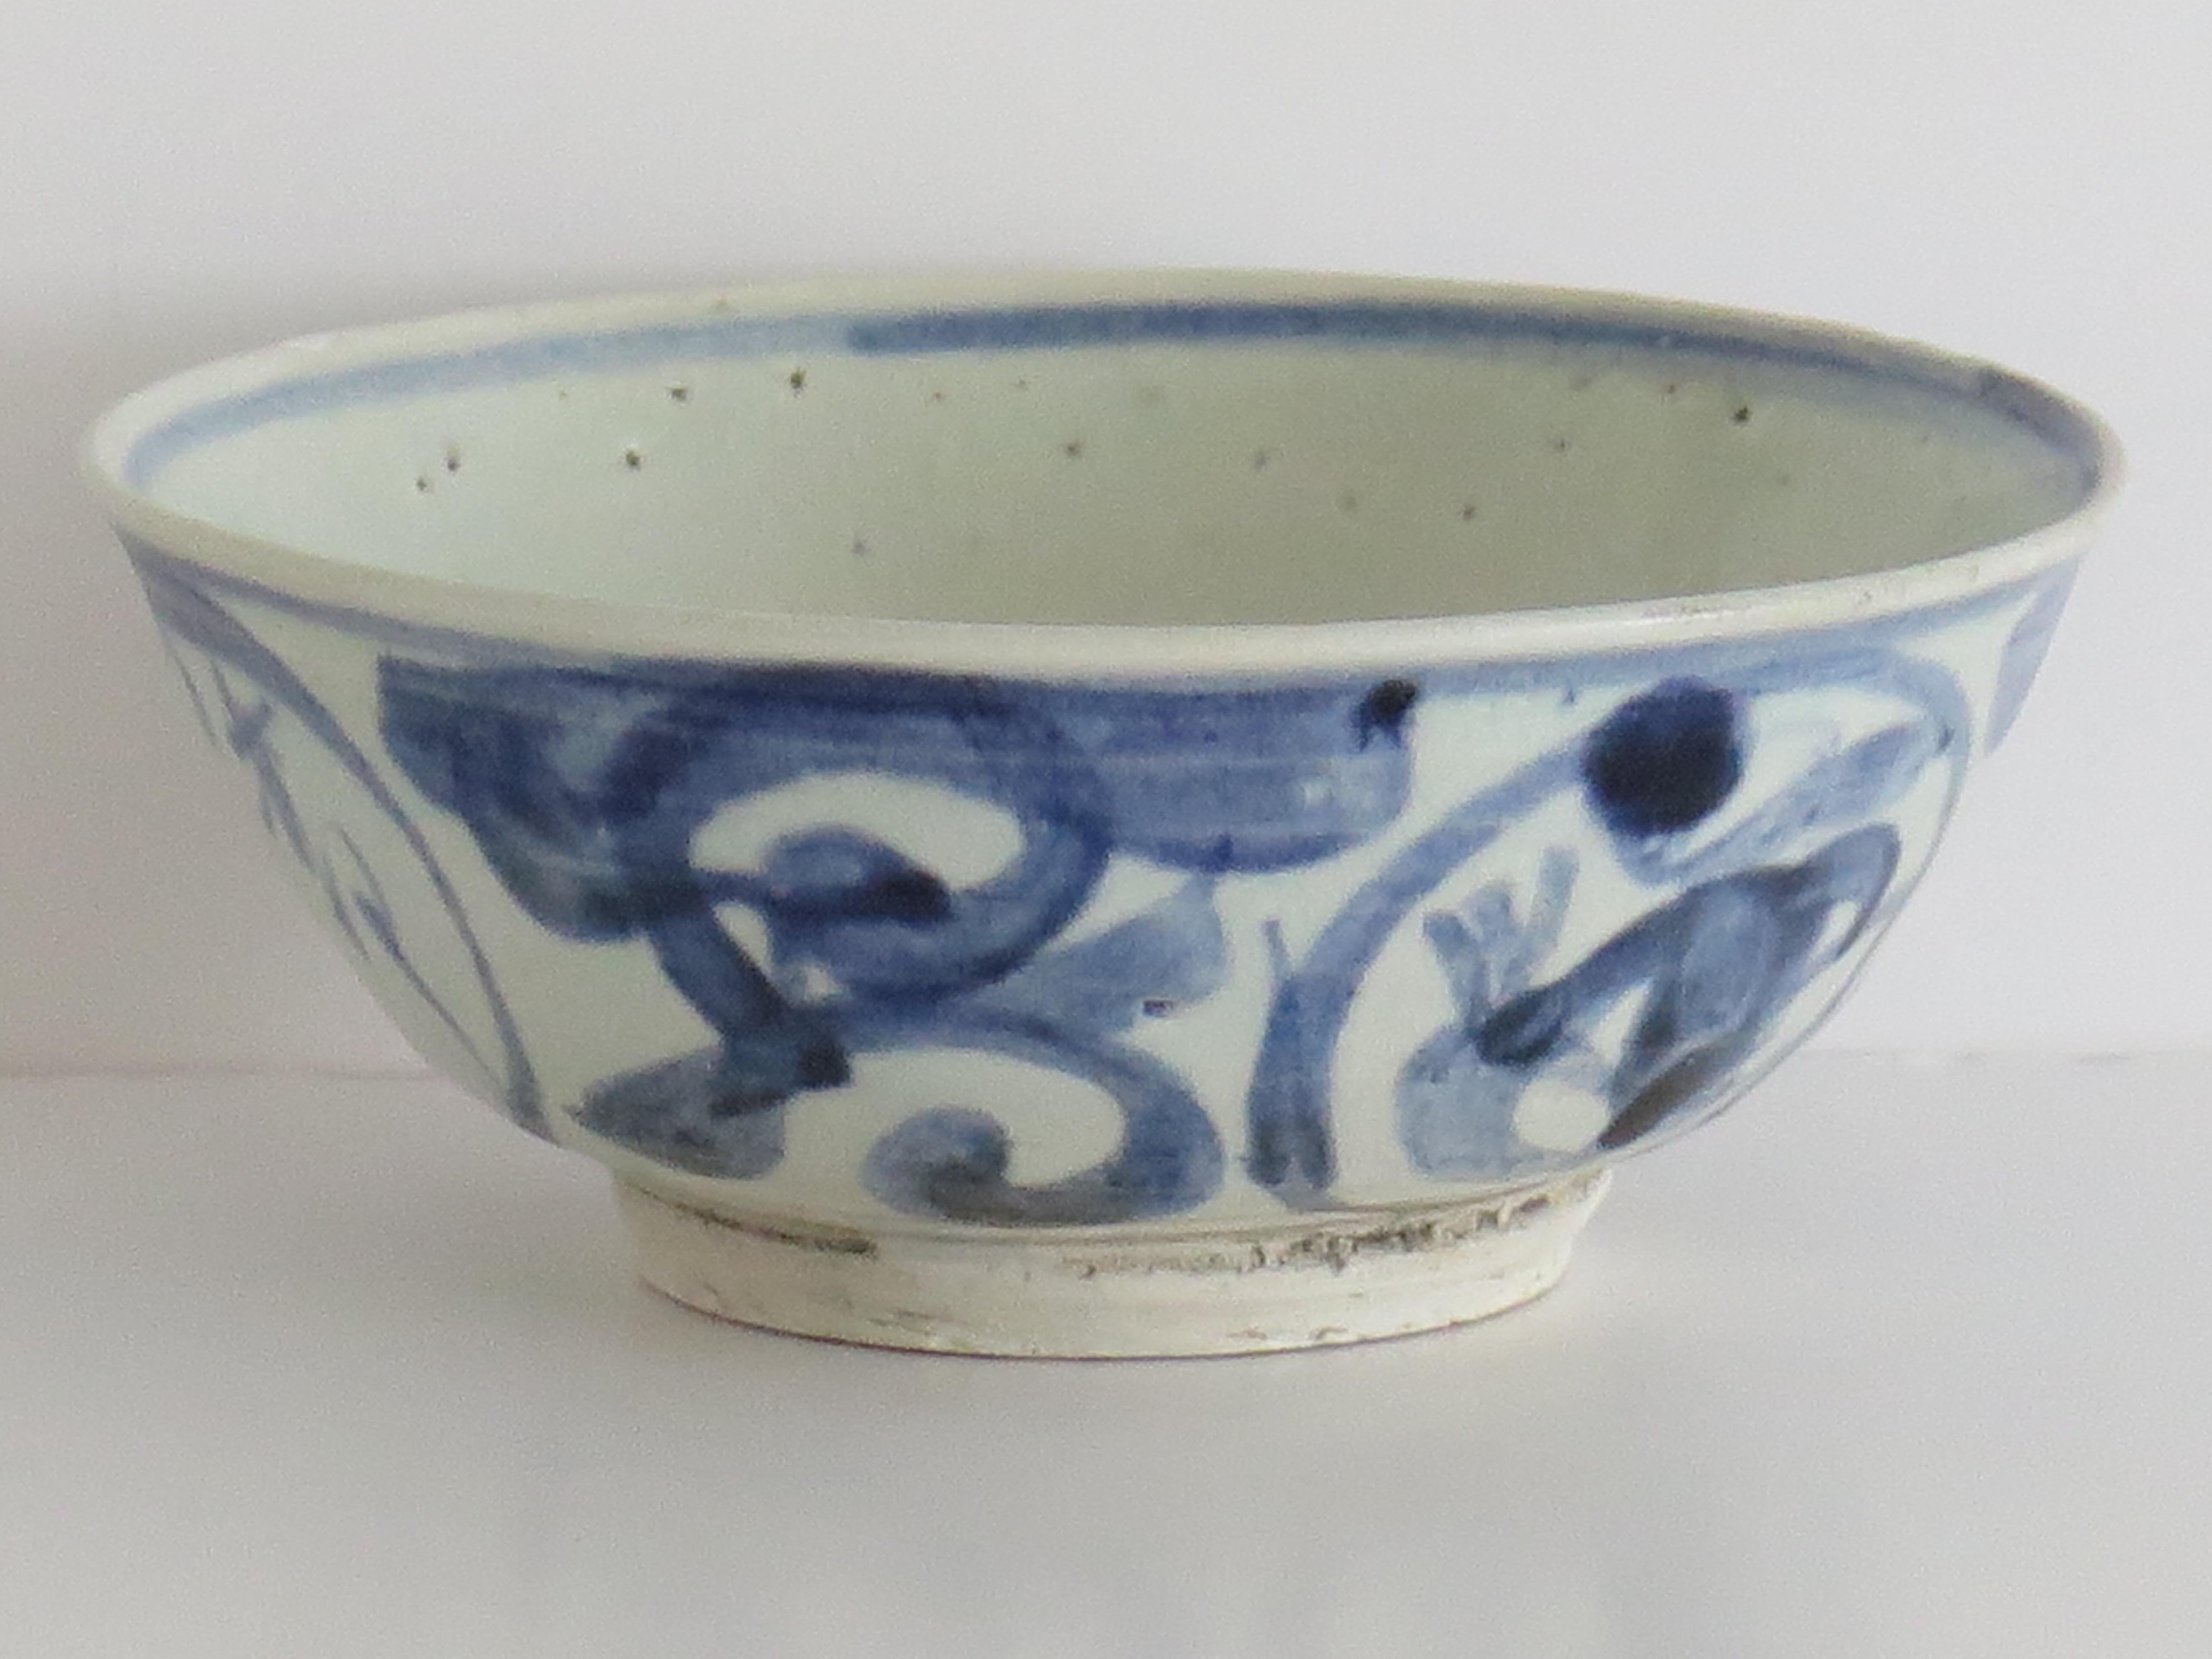 17th Century Chinese Export Porcelain Blue & White Bowl, Hatcher Cargo Late Ming, circa 1650